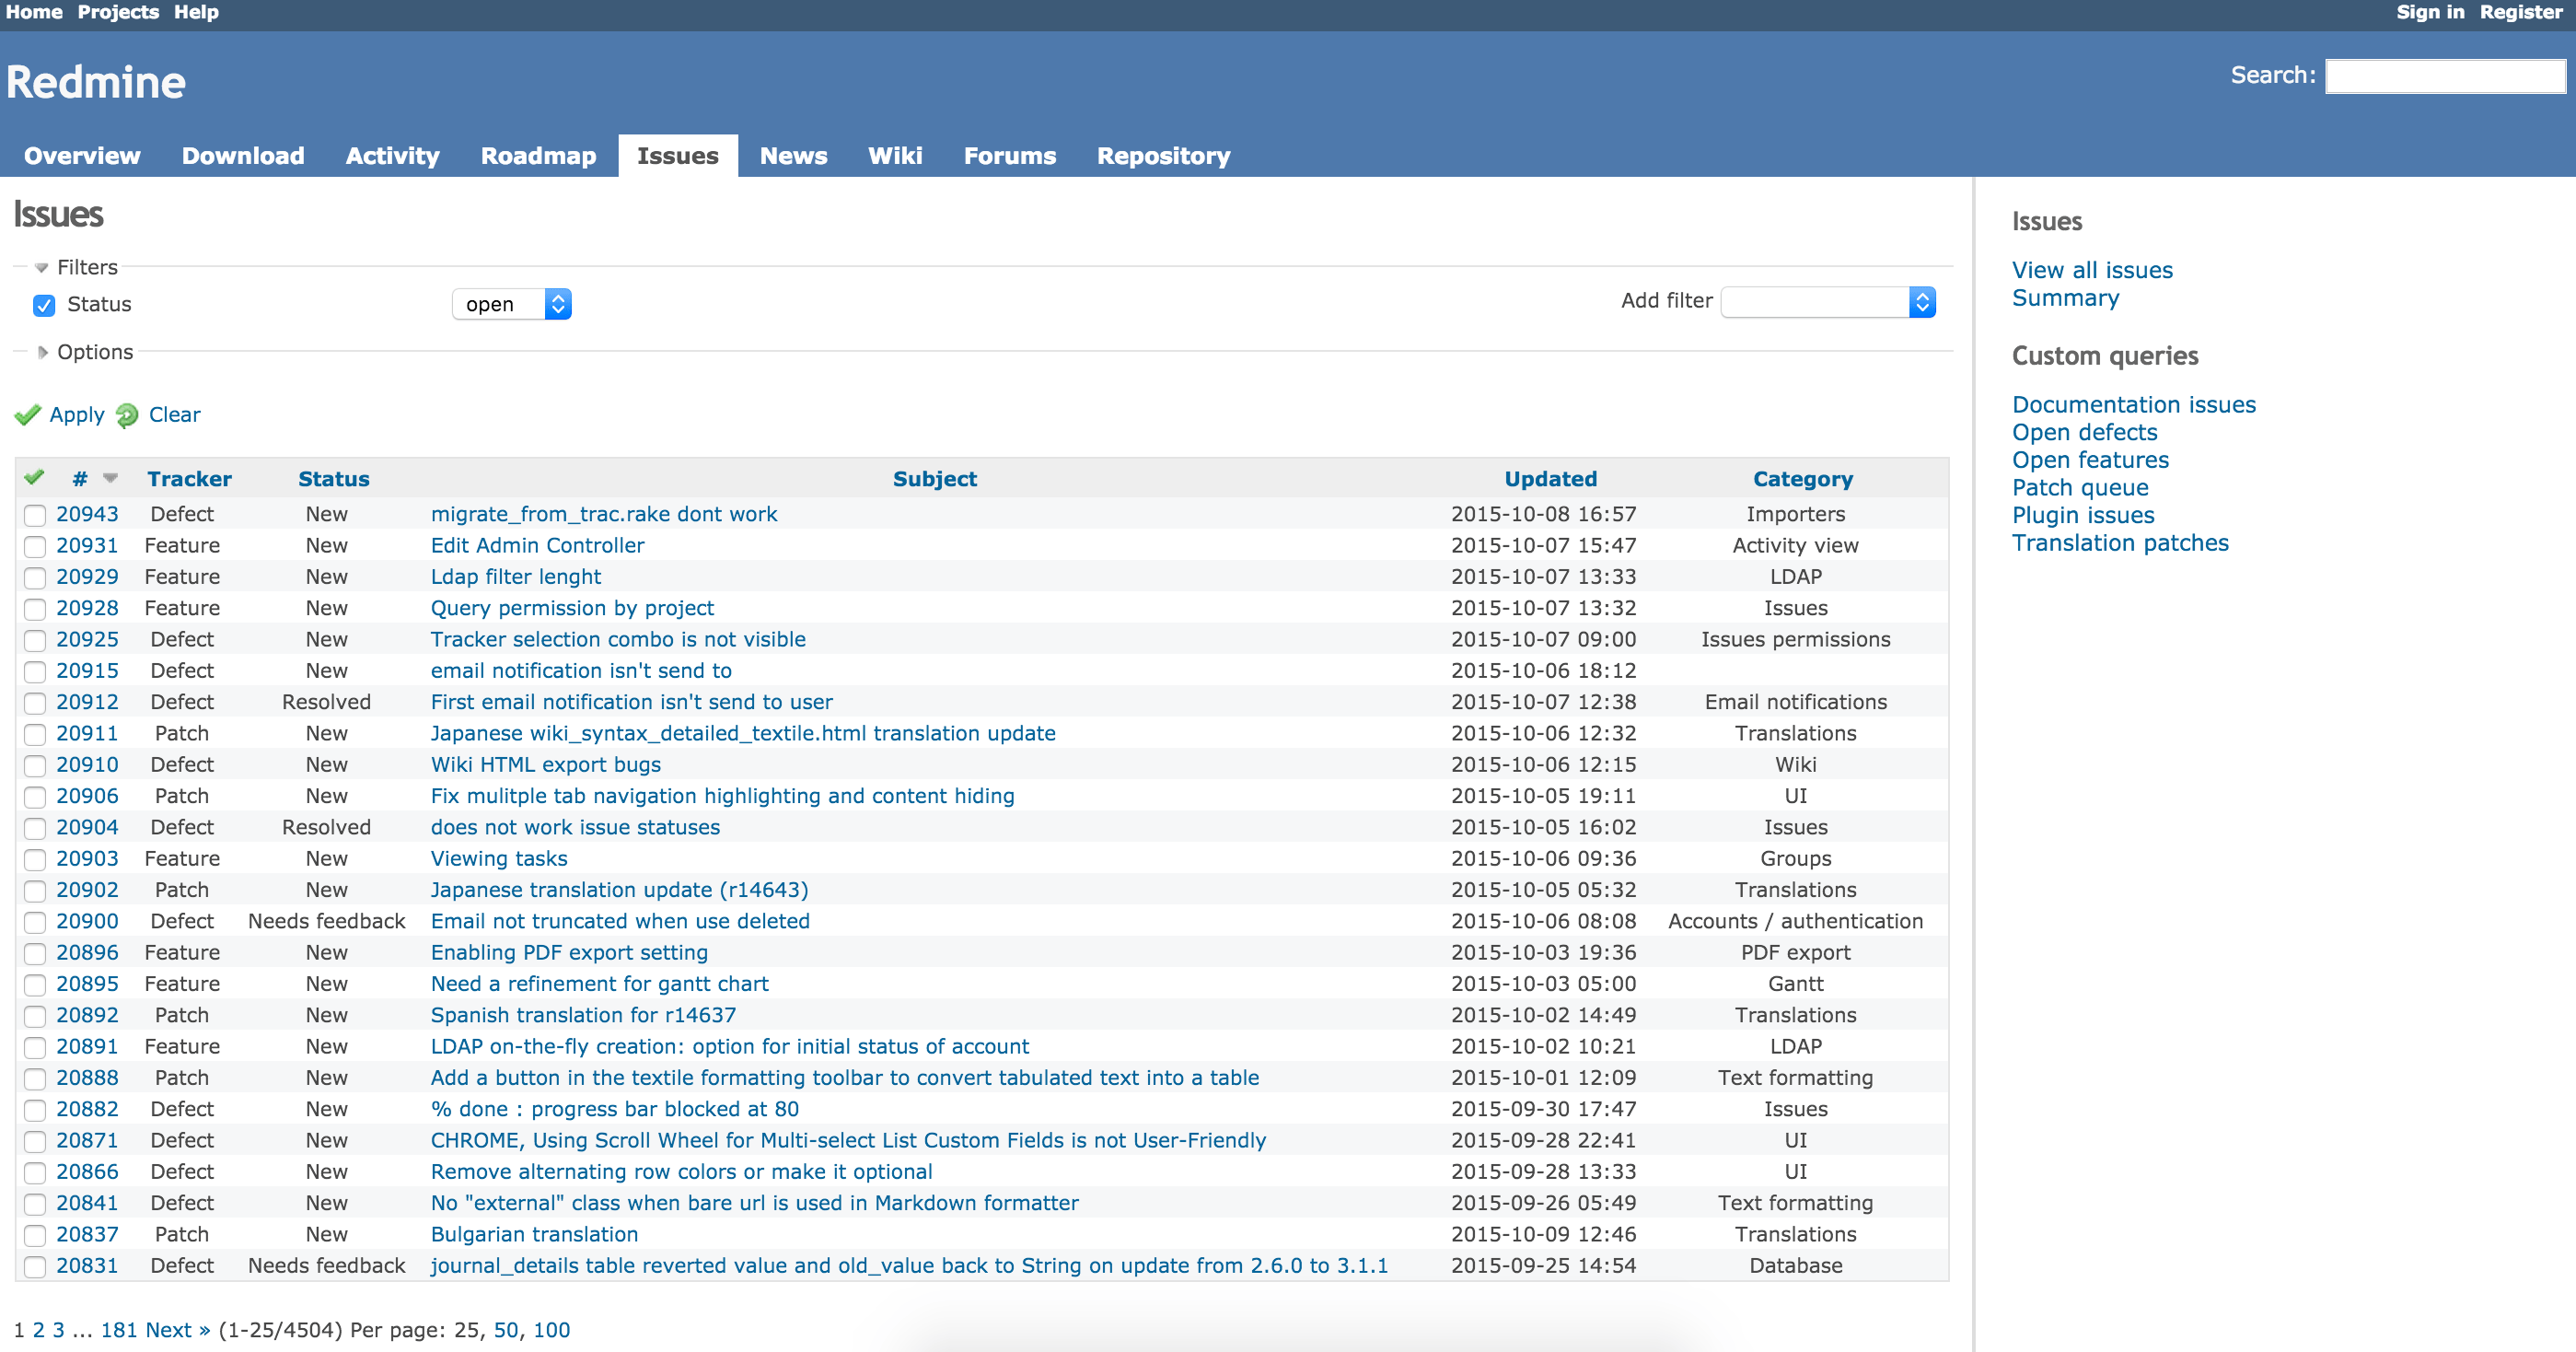 Redmine Issues Page with default theme